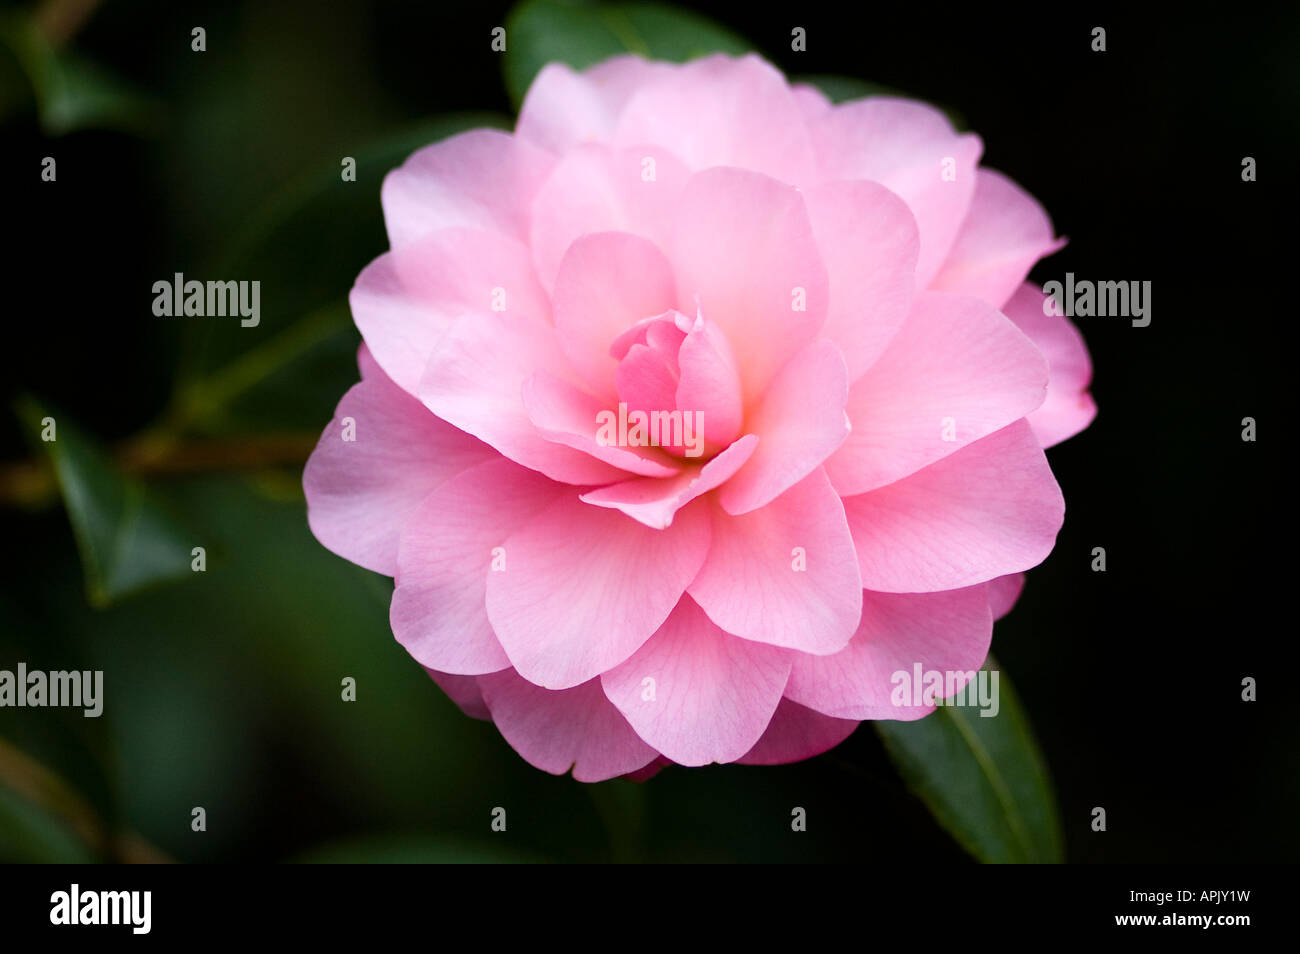 Winter flowering garden evergreen shrub with delicate pink flowers Stock Photo